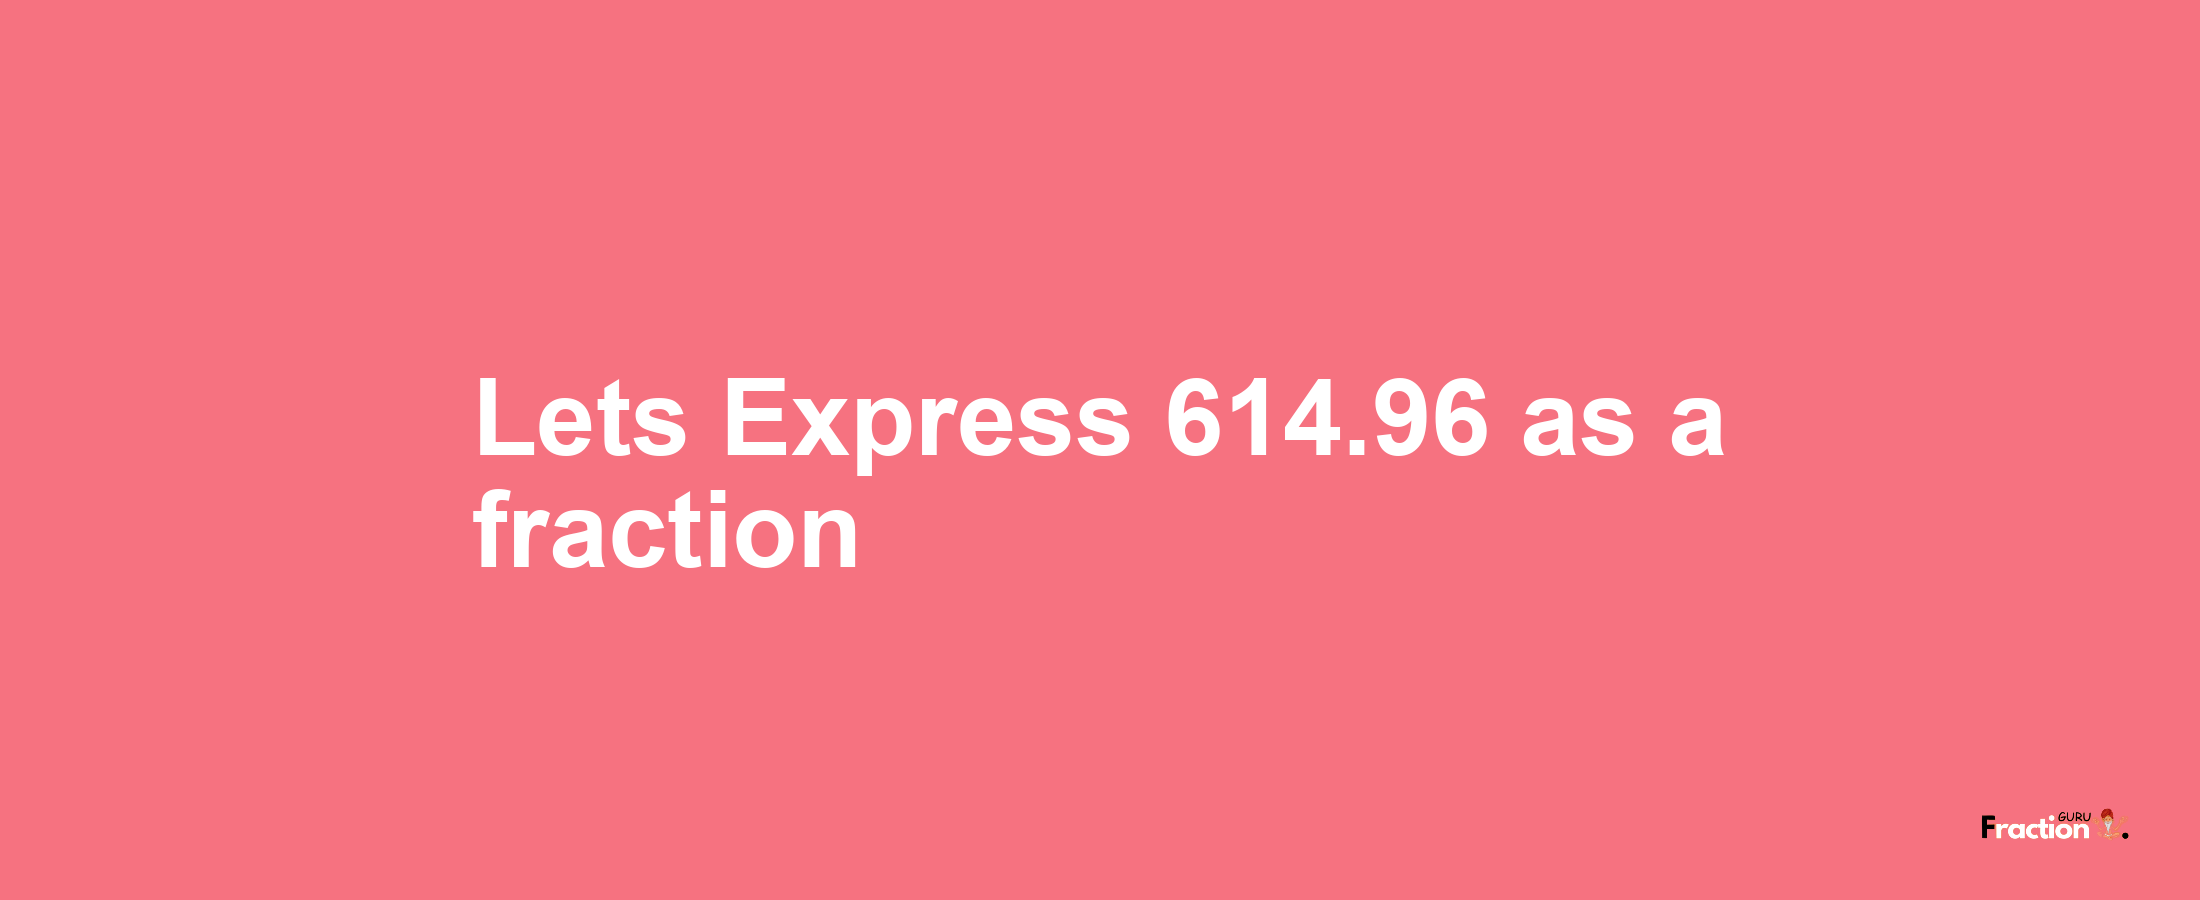 Lets Express 614.96 as afraction